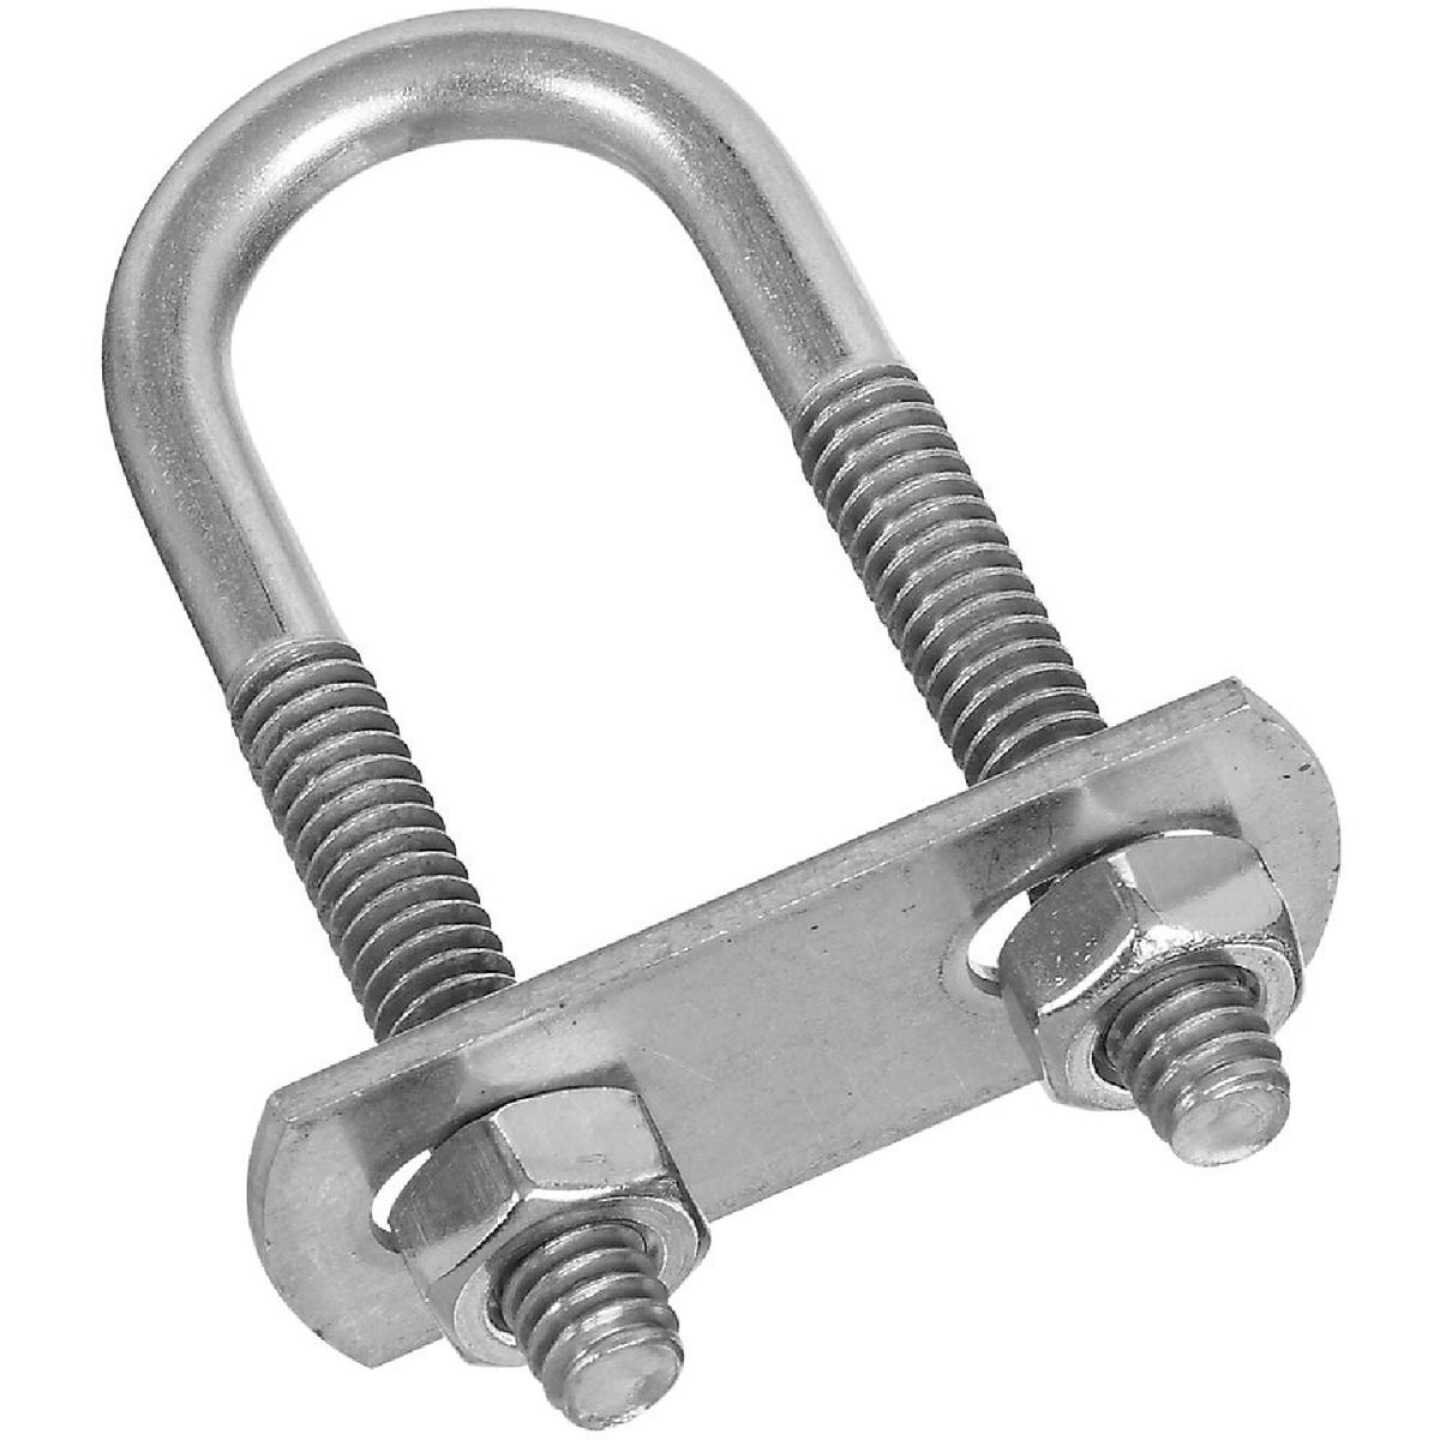 National 1/4 In. x 3/4 In. x 2-1/2 In. Stainless Steel Round U Bolt Image 1